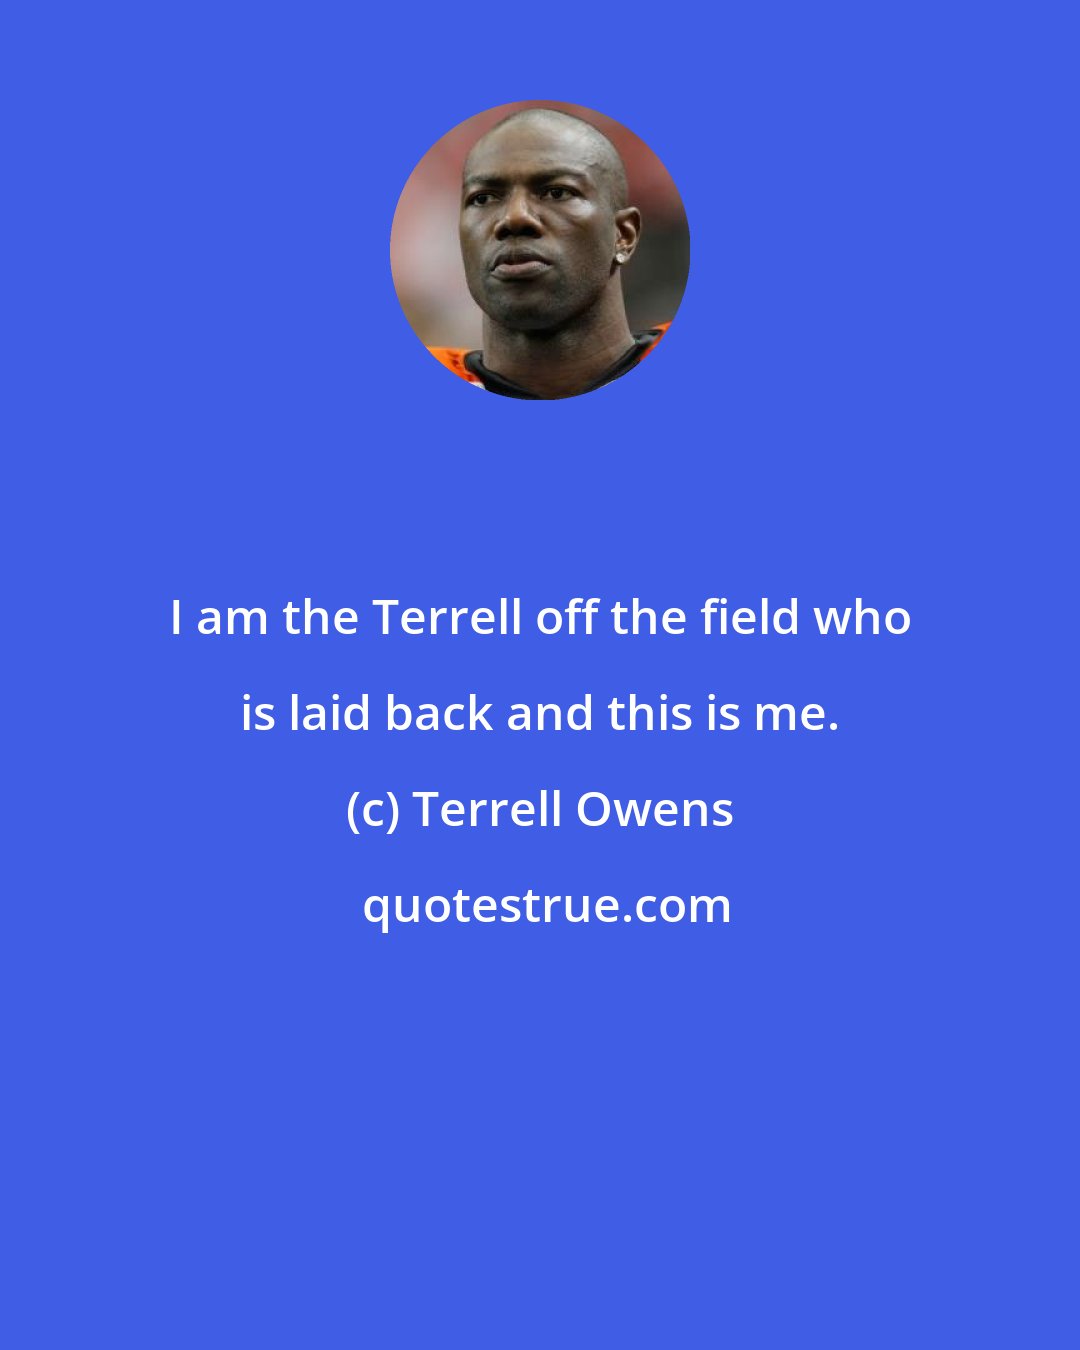 Terrell Owens: I am the Terrell off the field who is laid back and this is me.